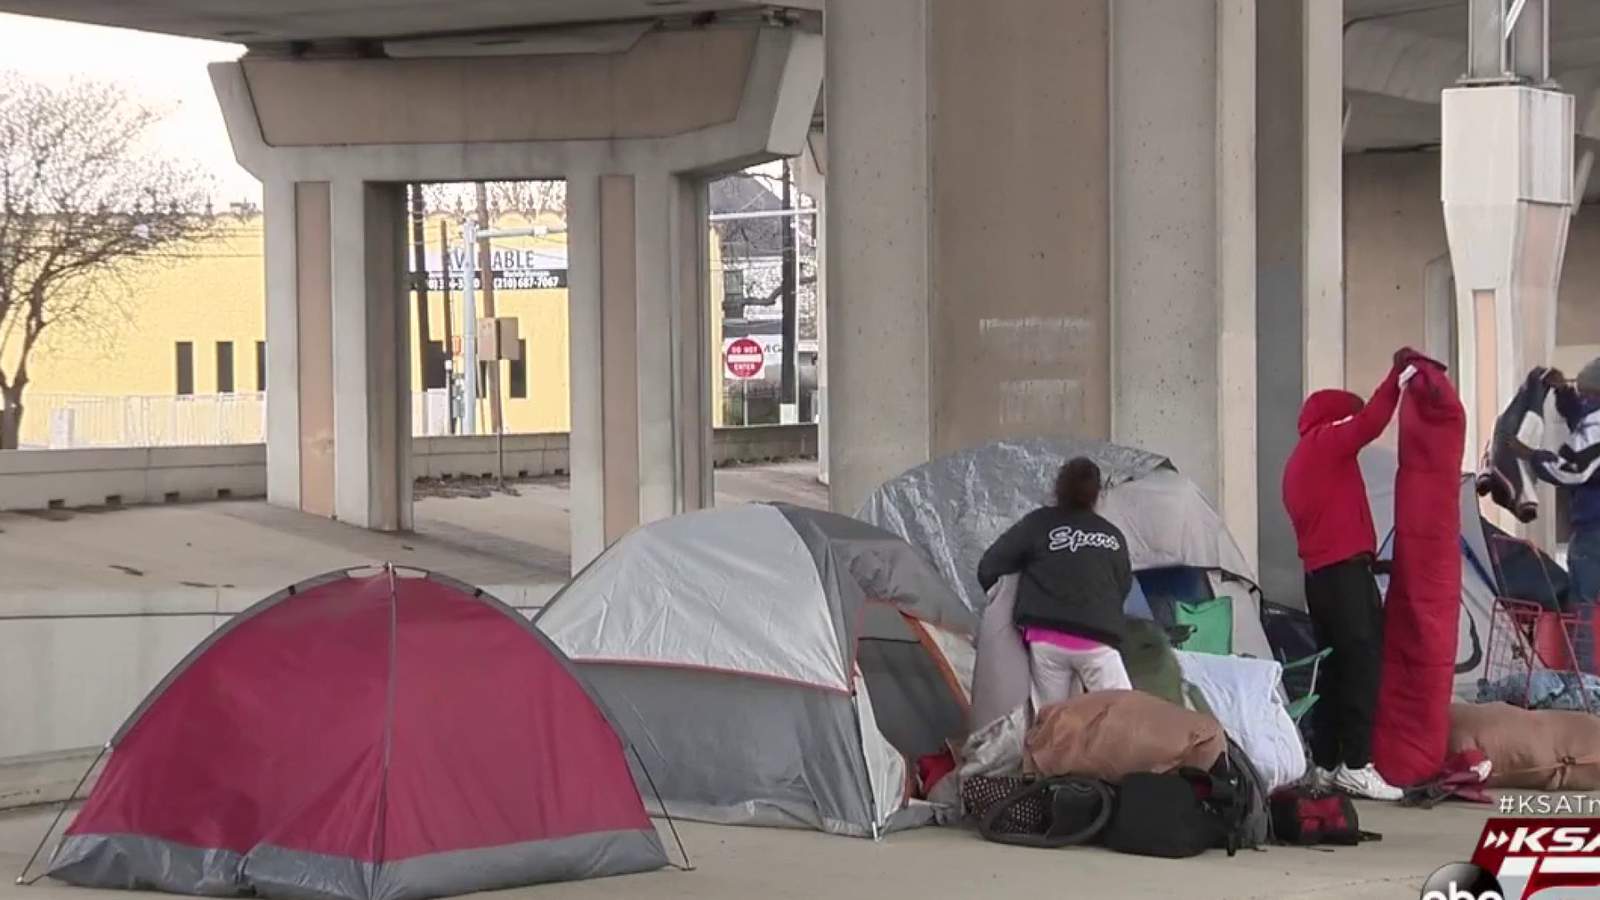 City crews clear another downtown homeless camp within the same week